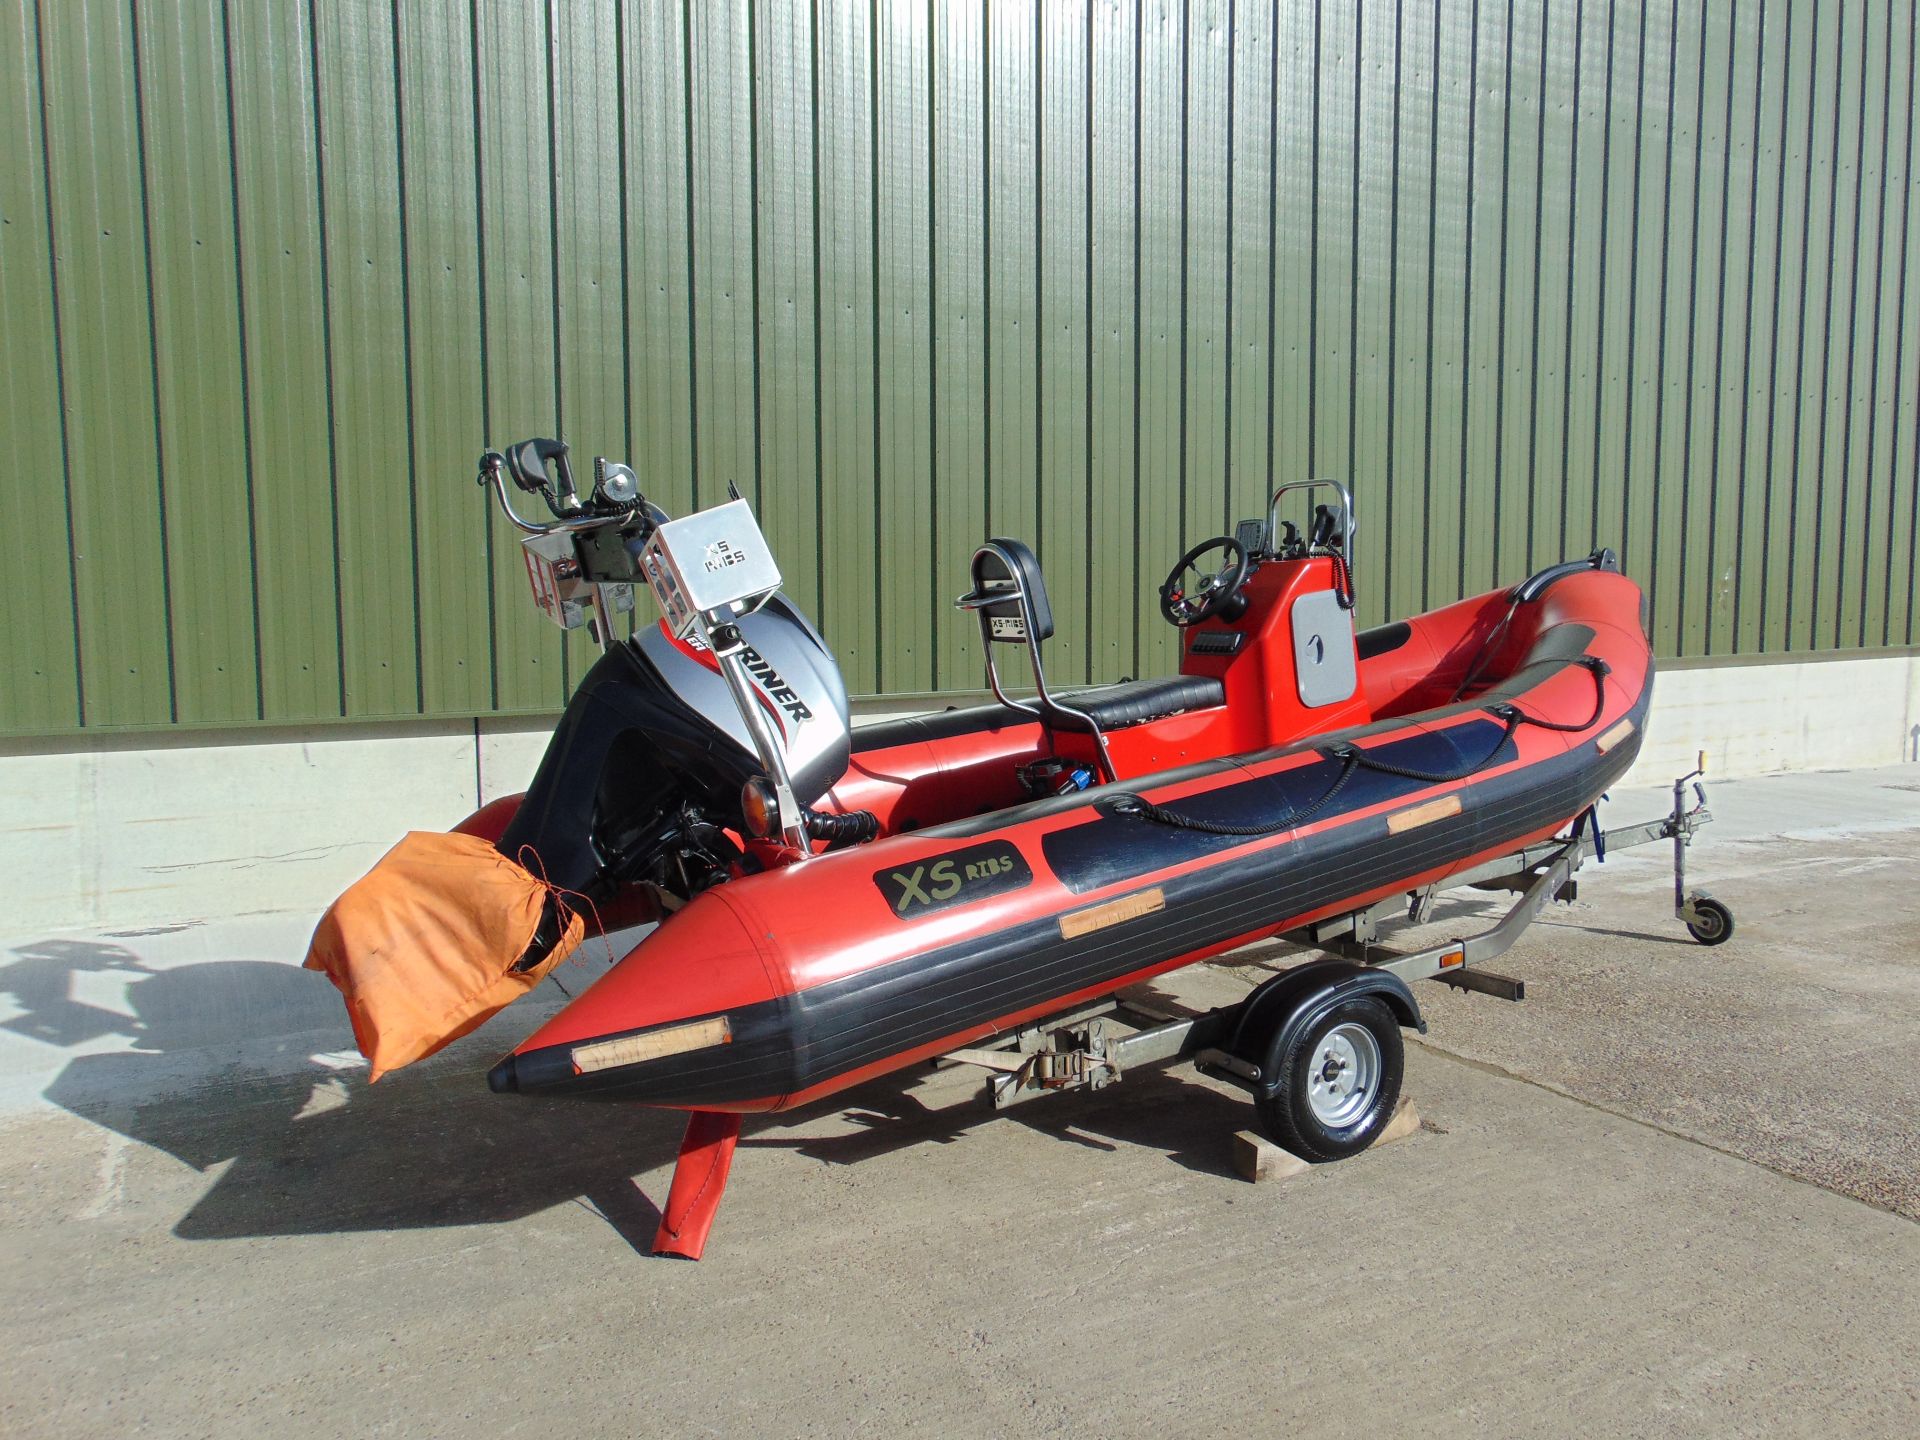 XS-Ribs 4.6M Inflatable w/ Mercury Mariner Four Stroke EFI 60HP Outboard Motor on Trailer. - Image 3 of 57